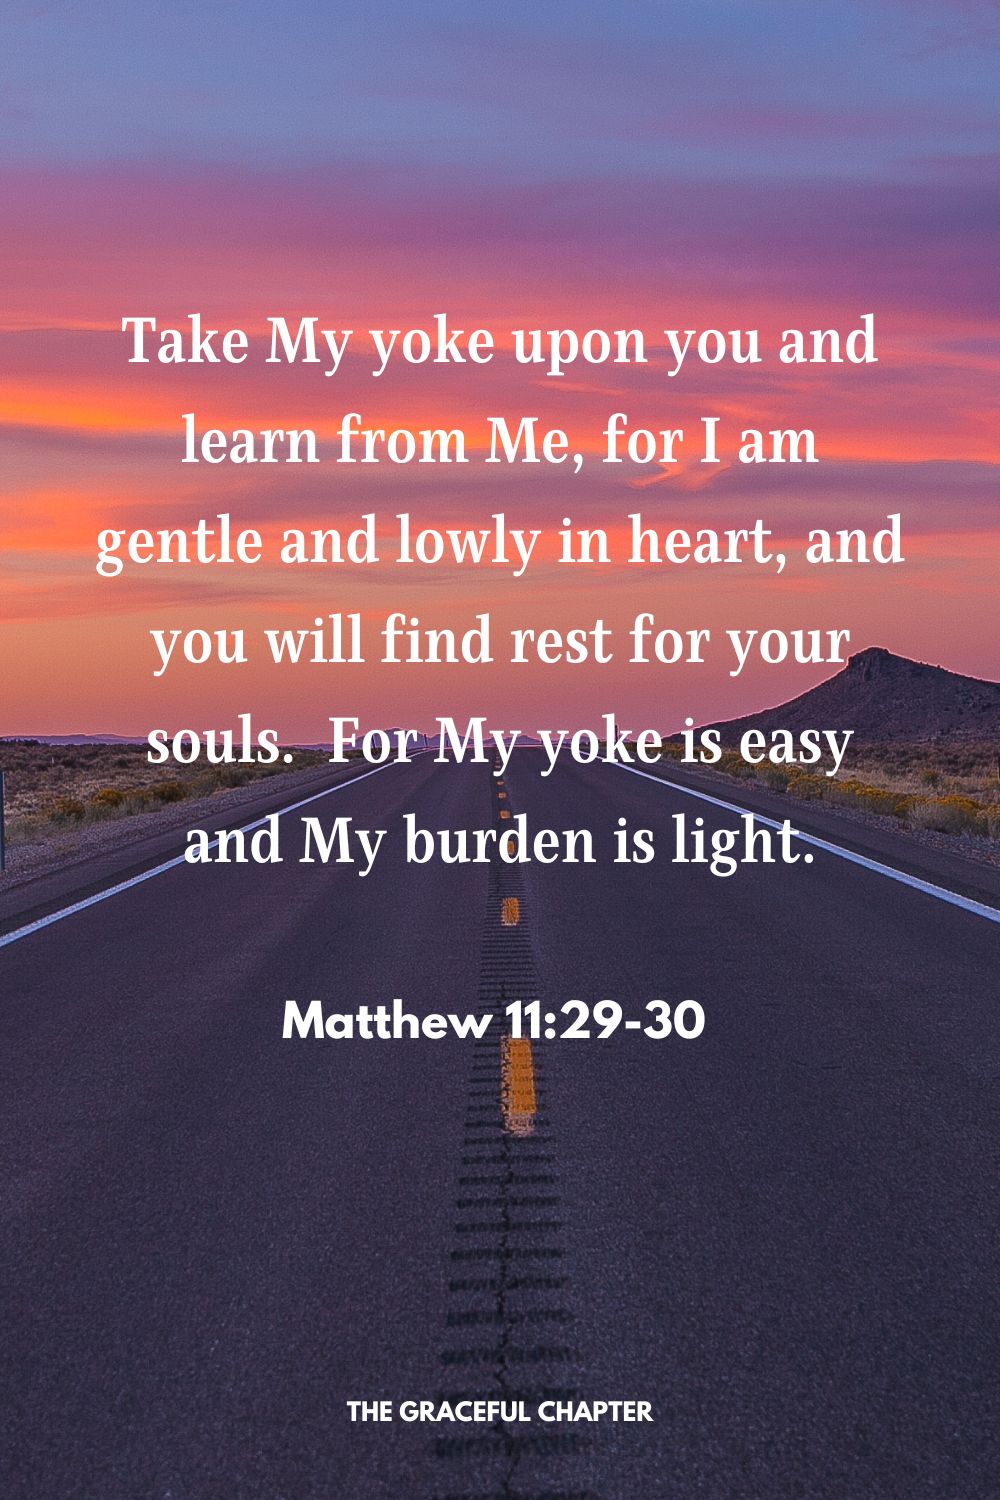 Take My yoke upon you and learn from Me, for I am gentle and lowly in heart, and you will find rest for your souls.  For My yoke is easy and My burden is light. Matthew 11:29-30 